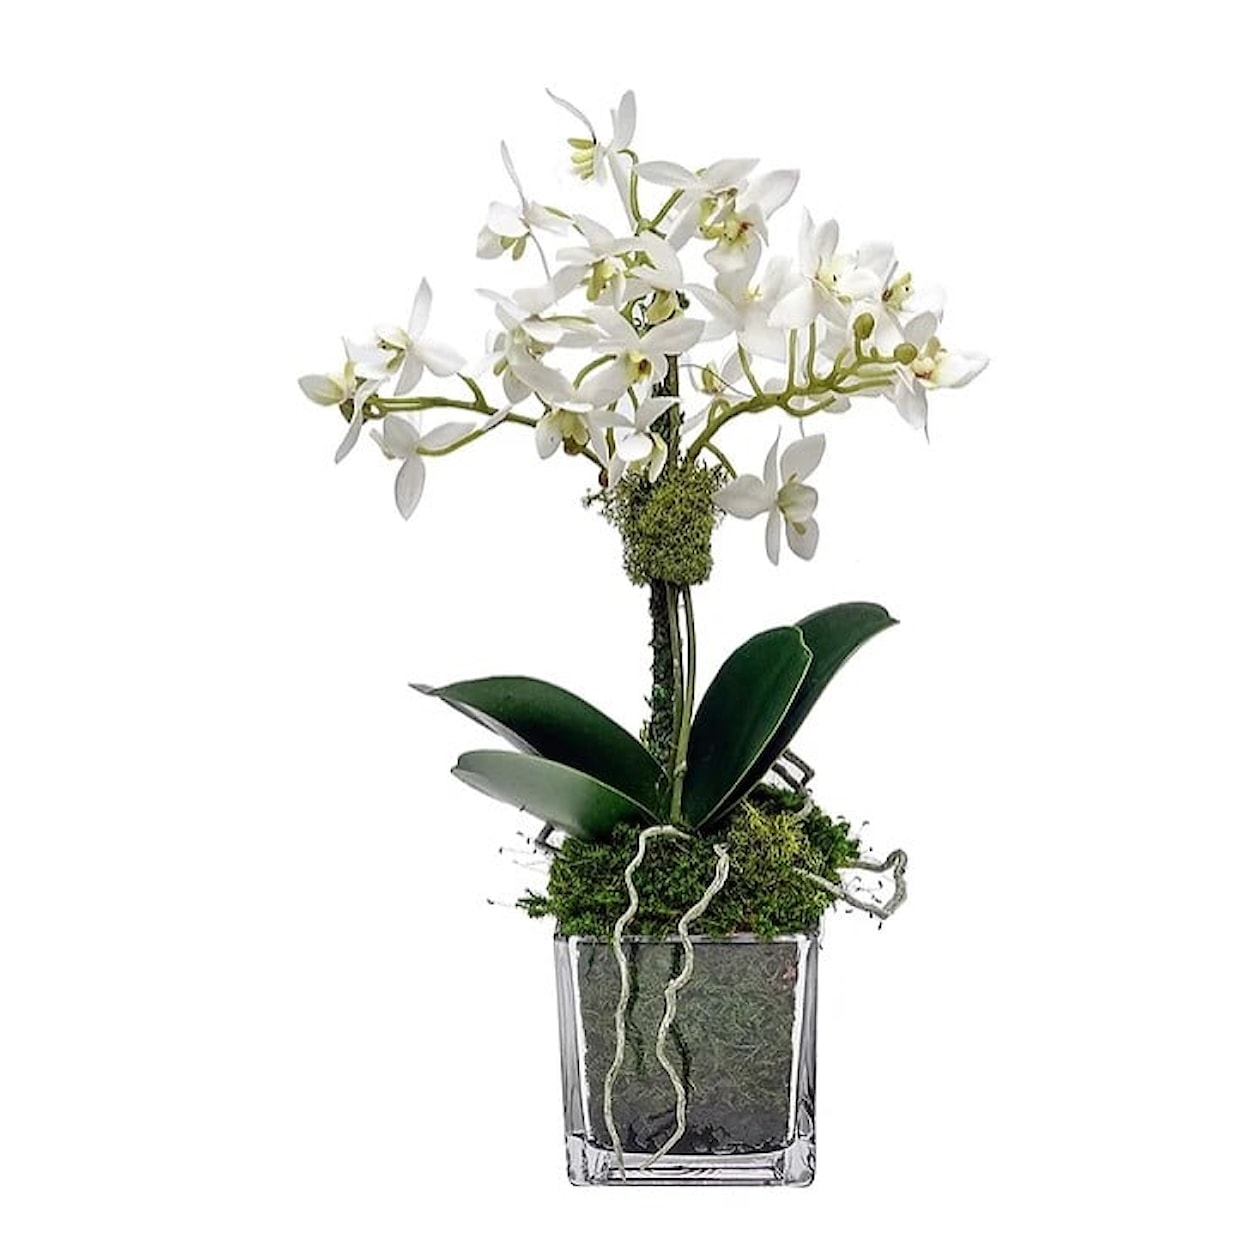 The Ivy Guild Orchids 3" Glass with Mini White Orchid